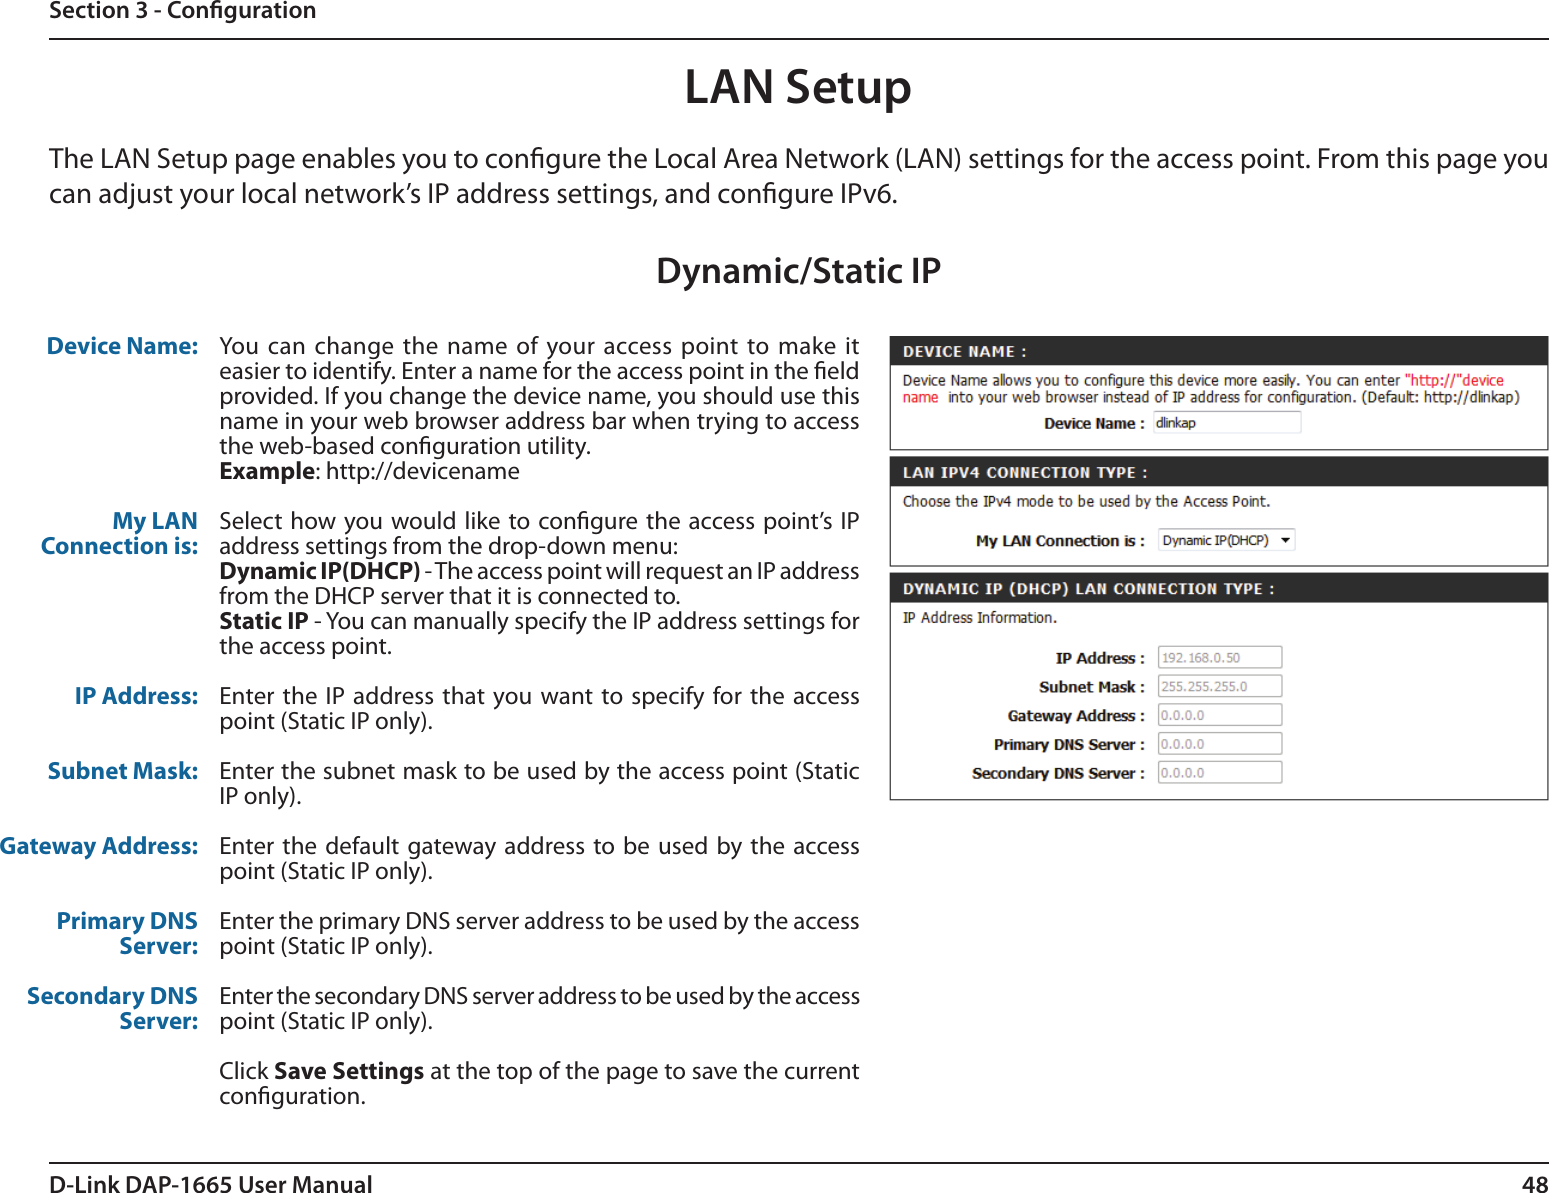 48D-Link DAP-1665 User ManualSection 3 - CongurationLAN SetupThe LAN Setup page enables you to congure the Local Area Network (LAN) settings for the access point. From this page you can adjust your local network’s IP address settings, and congure IPv6. Dynamic/Static IPDevice Name:My LAN Connection is:IP Address:Subnet Mask:Gateway Address:Primary DNS Server:Secondary DNS Server:You can change the name of your access point to make it easier to identify. Enter a name for the access point in the eld provided. If you change the device name, you should use this name in your web browser address bar when trying to access the web-based conguration utility.Example: http://devicenameSelect  how you  would like to congure the access point’s IP address settings from the drop-down menu:Dynamic IP(DHCP) - The access point will request an IP address from the DHCP server that it is connected to.Static IP - You can manually specify the IP address settings for the access point. Enter  the  IP  address that you want to specify  for  the  access point (Static IP only).Enter the subnet mask to be used by the access point (Static IP only).Enter the default  gateway address to be  used by the access point (Static IP only).Enter the primary DNS server address to be used by the access point (Static IP only).Enter the secondary DNS server address to be used by the access point (Static IP only).Click Save Settings at the top of the page to save the current conguration. 